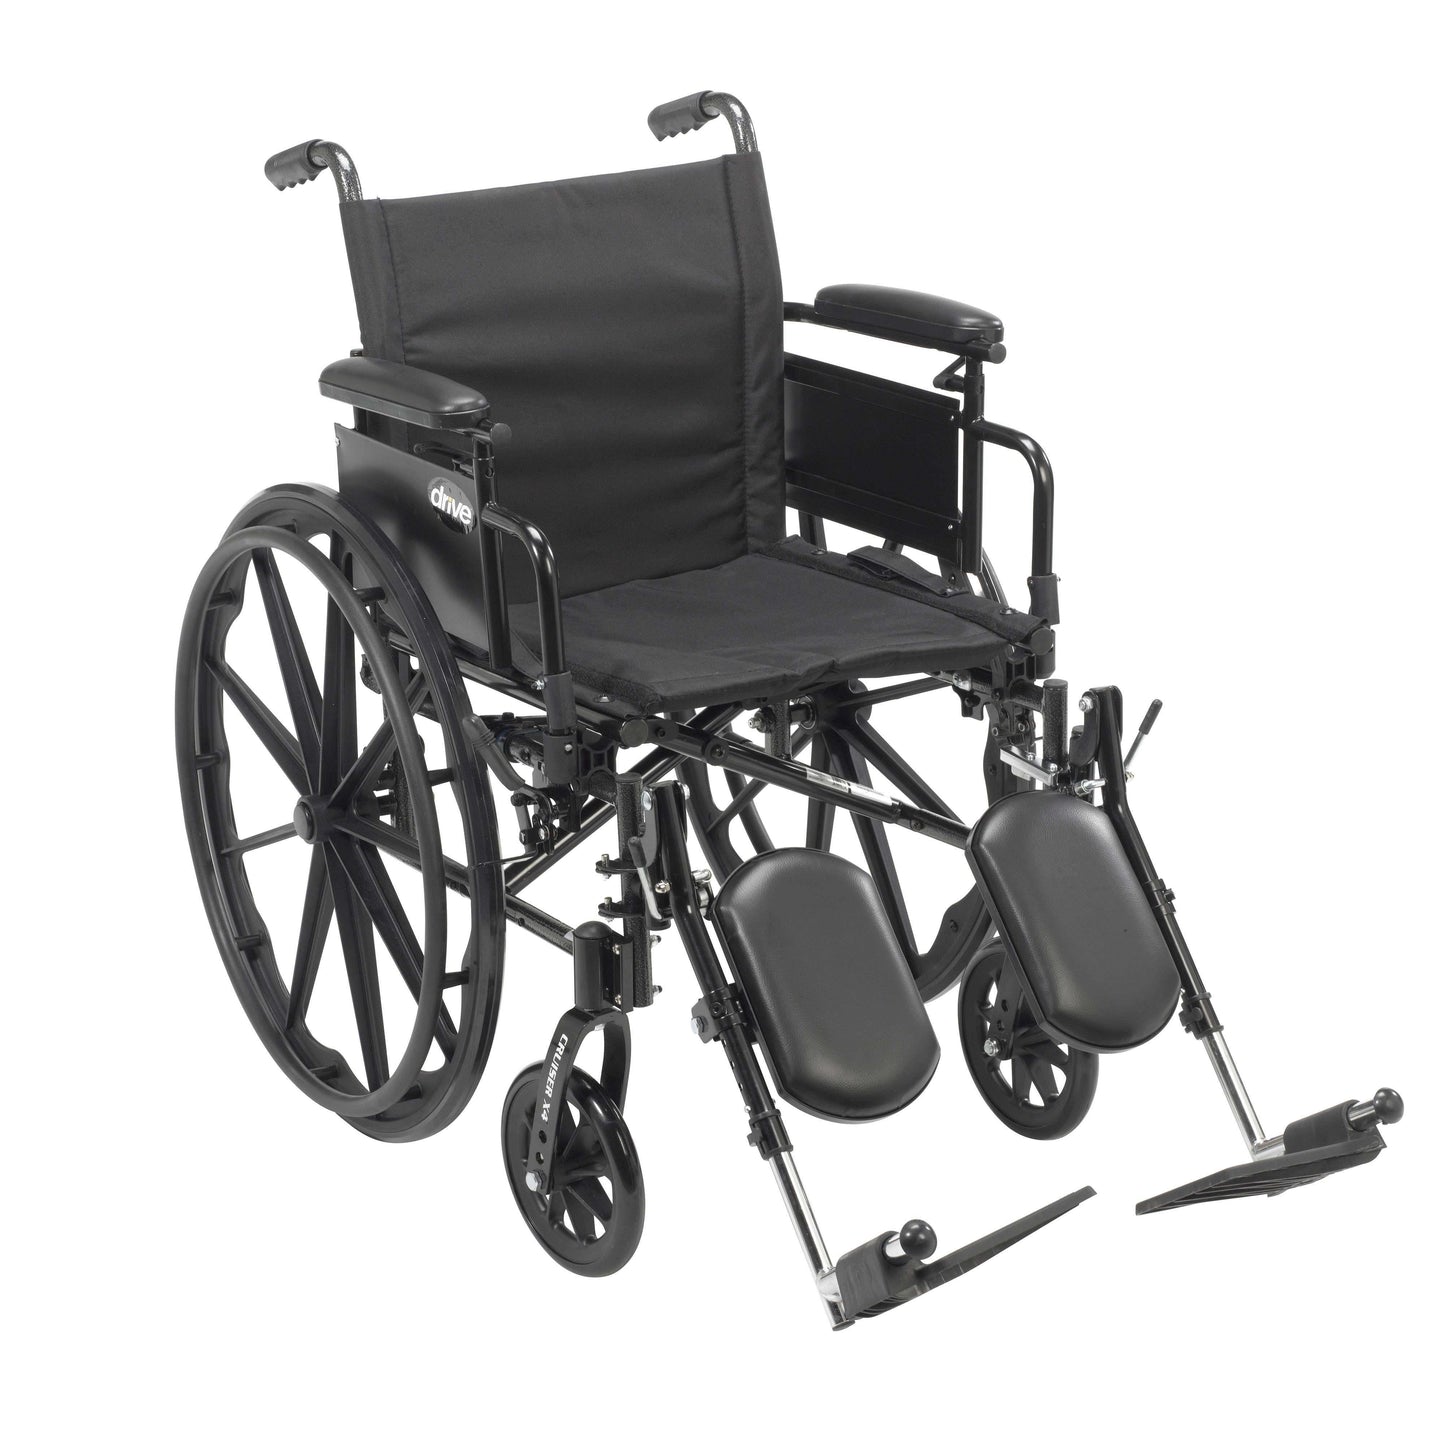 Drive cx418adda-elr Cruiser X4 Lightweight Dual Axle Wheelchair with Adjustable Detachable Arms, Desk Arms, Elevating Leg Rests, 18" Seat